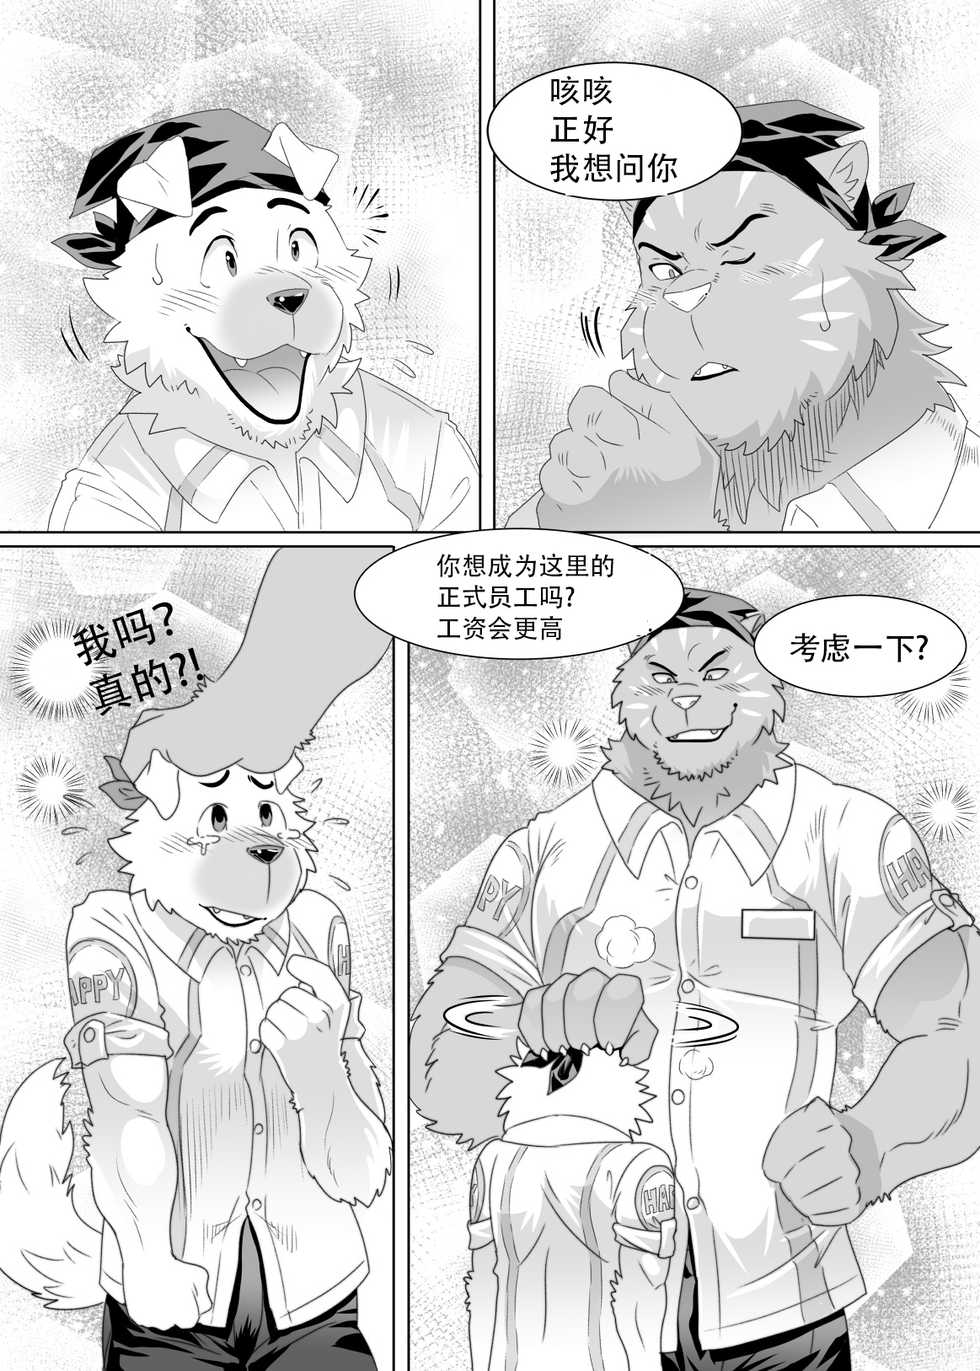 [KUMAHACHI] - "开心"便利店 ["Happy" Convenience Store] [Chinese] - Page 23